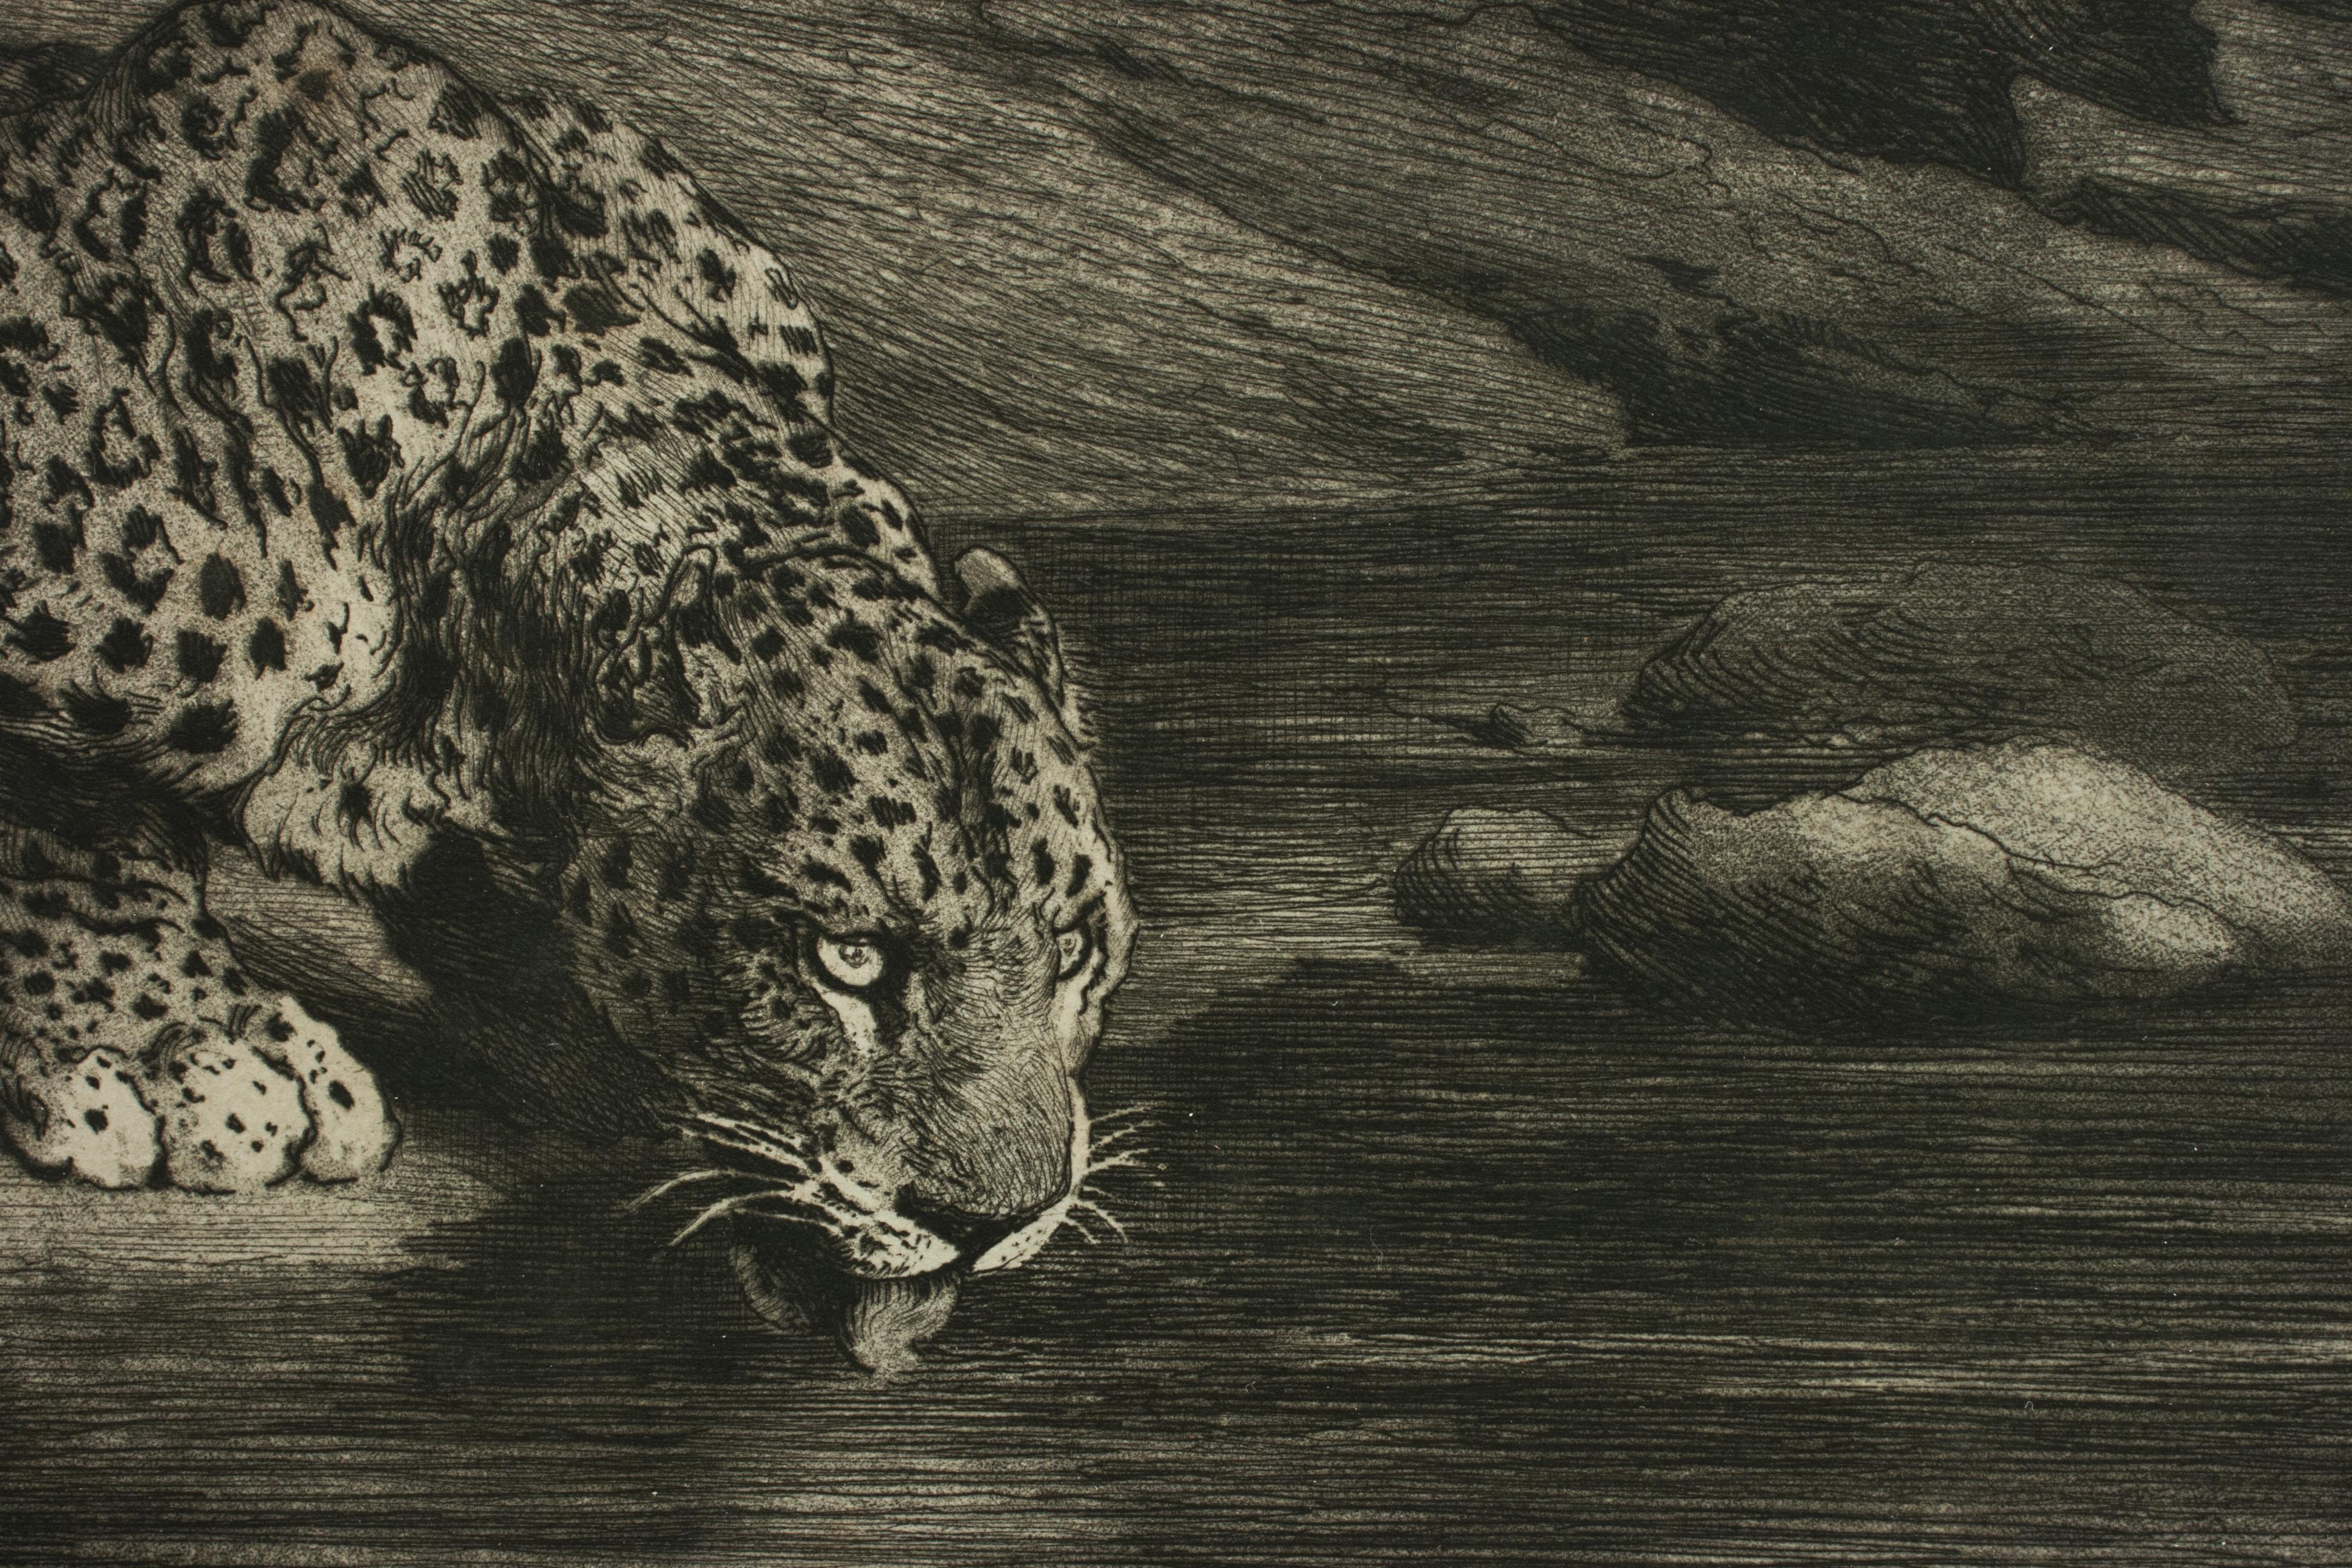 Leopard Drinking from the River by Herbert Dicksee, Drinking at the Waters Edge  1